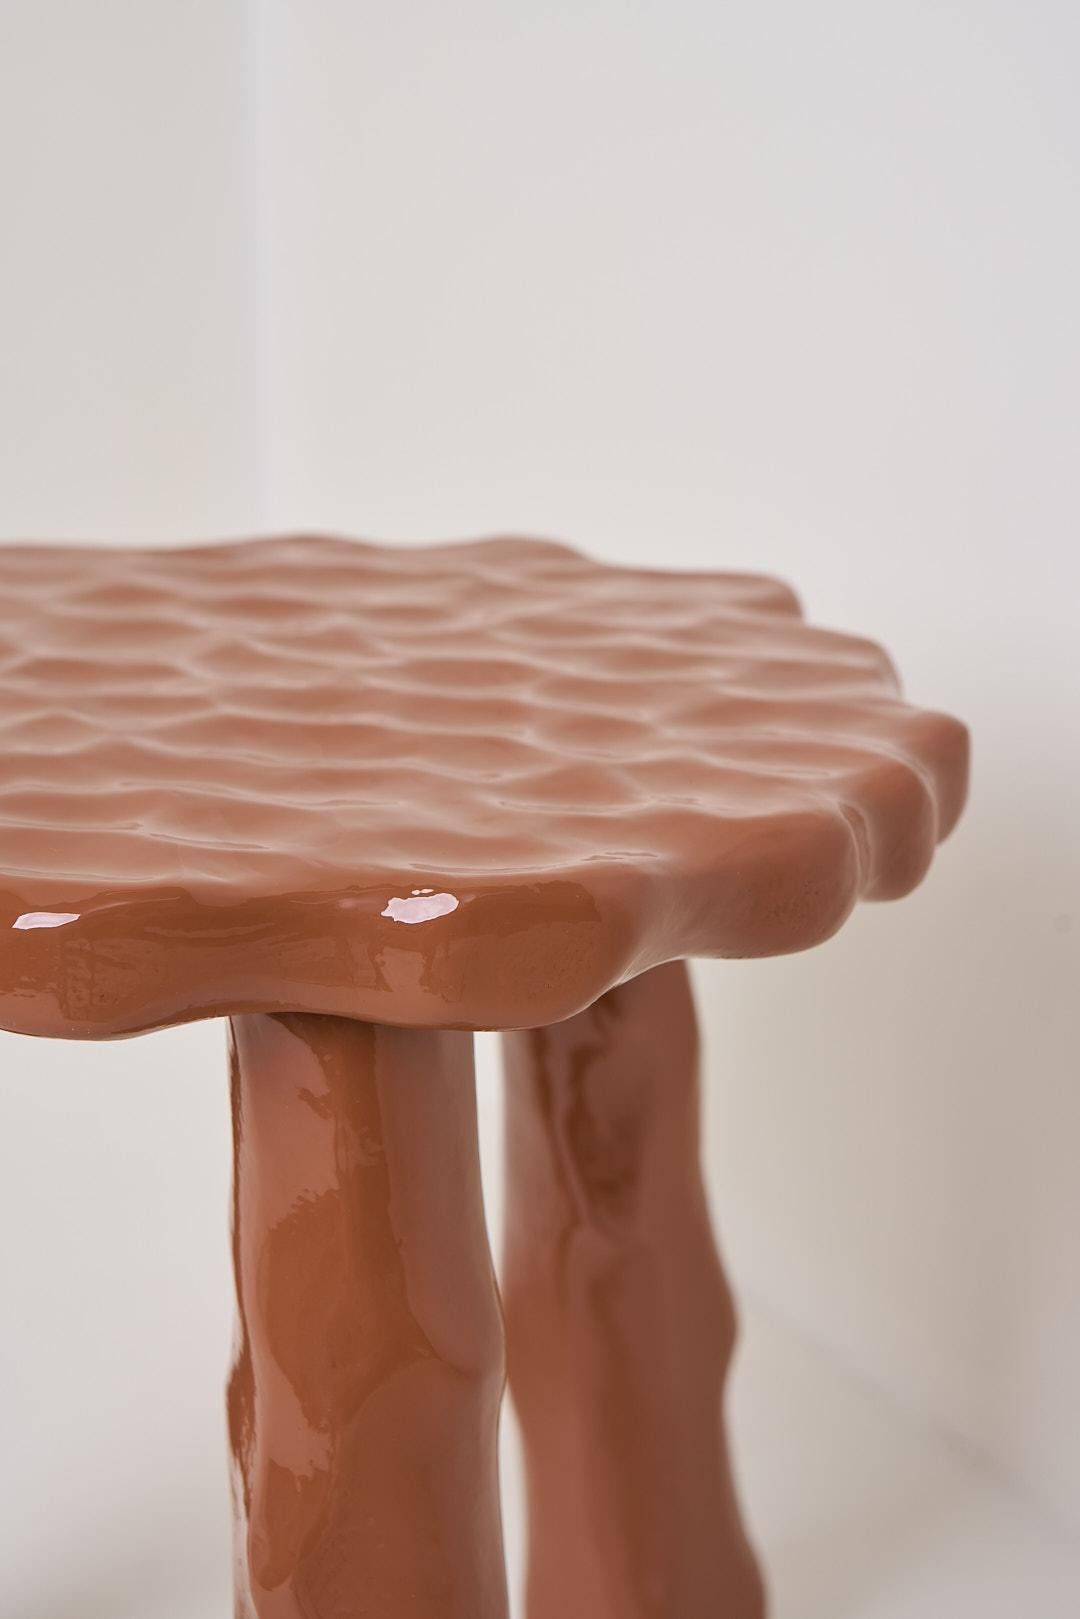 Afinco Collection, Low Terracotta Wooden Stool  In New Condition For Sale In Belo Horizonte, Minas Gerais